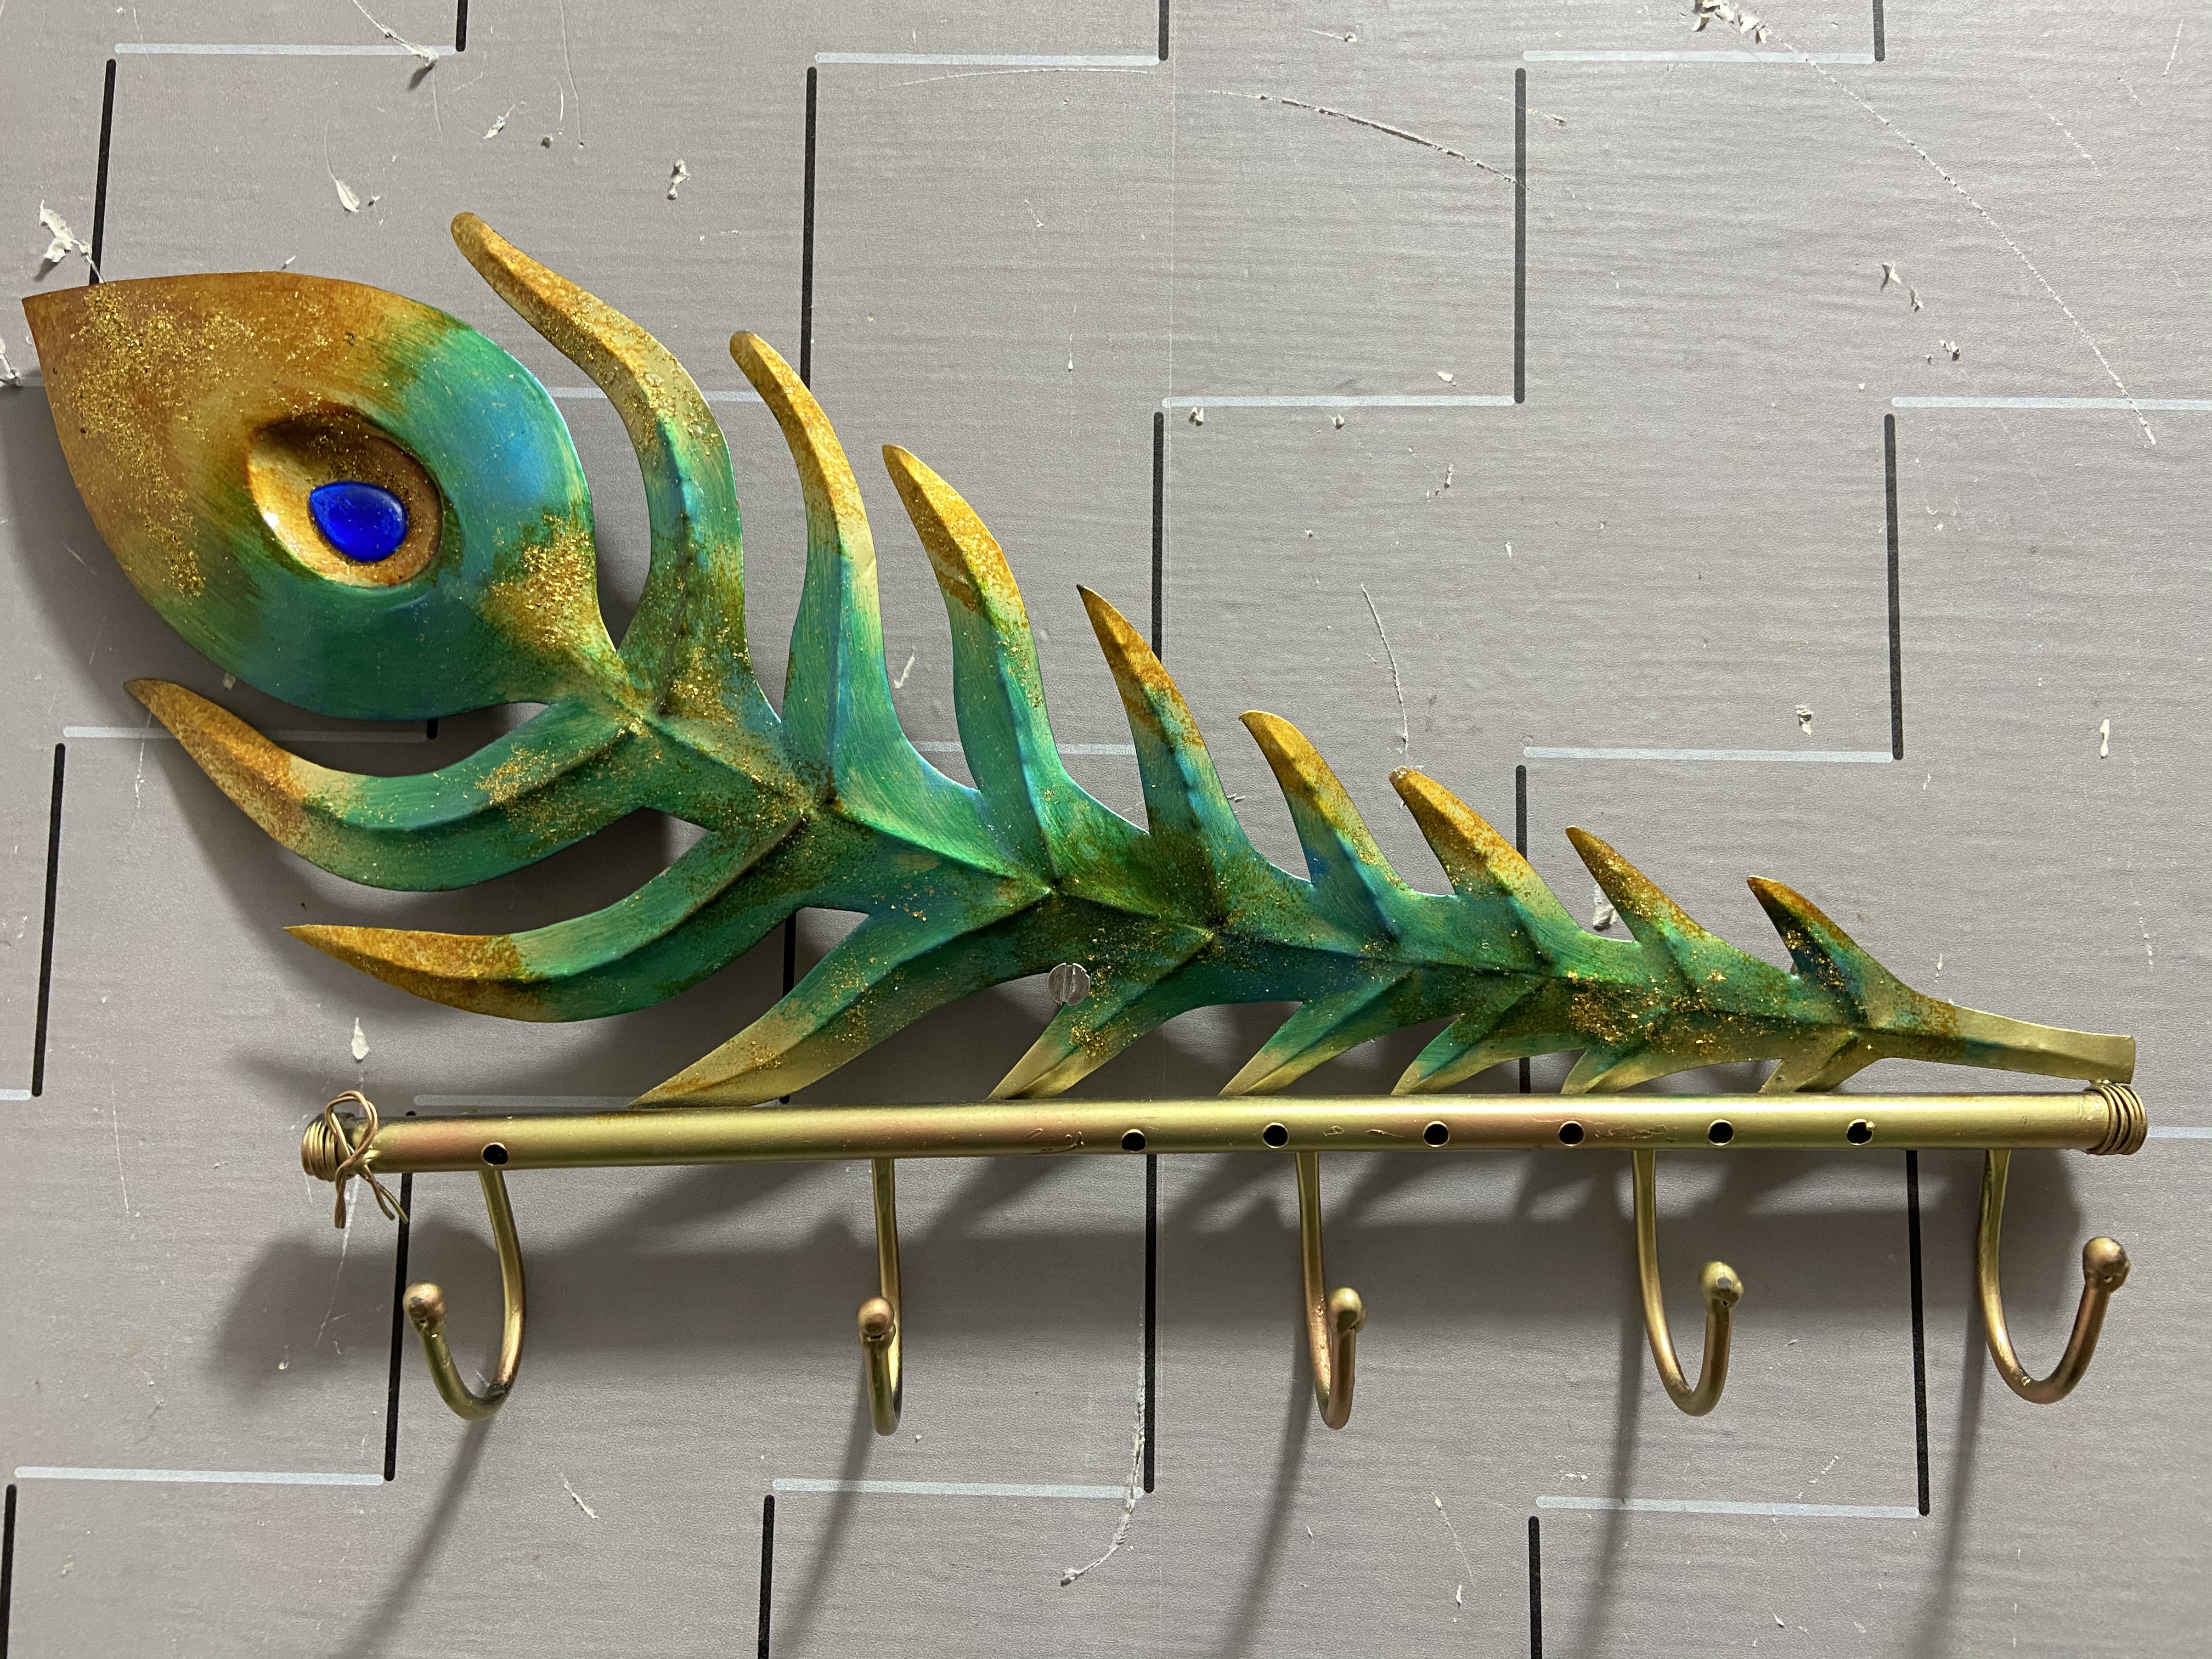 https://upload.wikimedia.org/wikipedia/commons/7/73/Peacock_Feather_Metal_Wall_Decor_With_Hooks.jpg